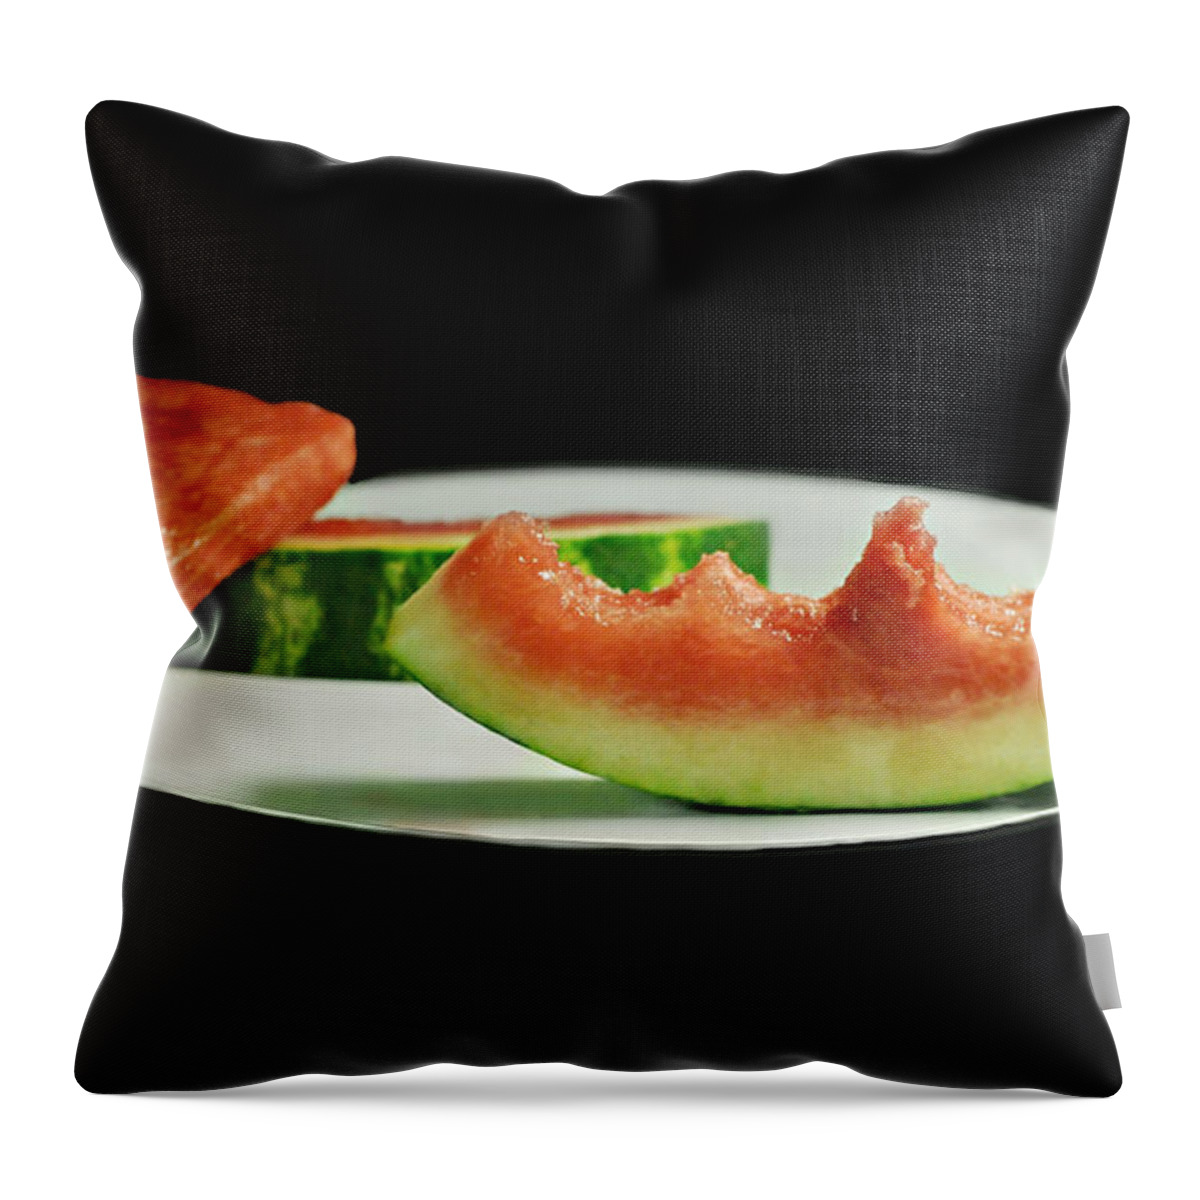 Fruit Throw Pillow featuring the photograph Watermelon Rind by Diana Angstadt